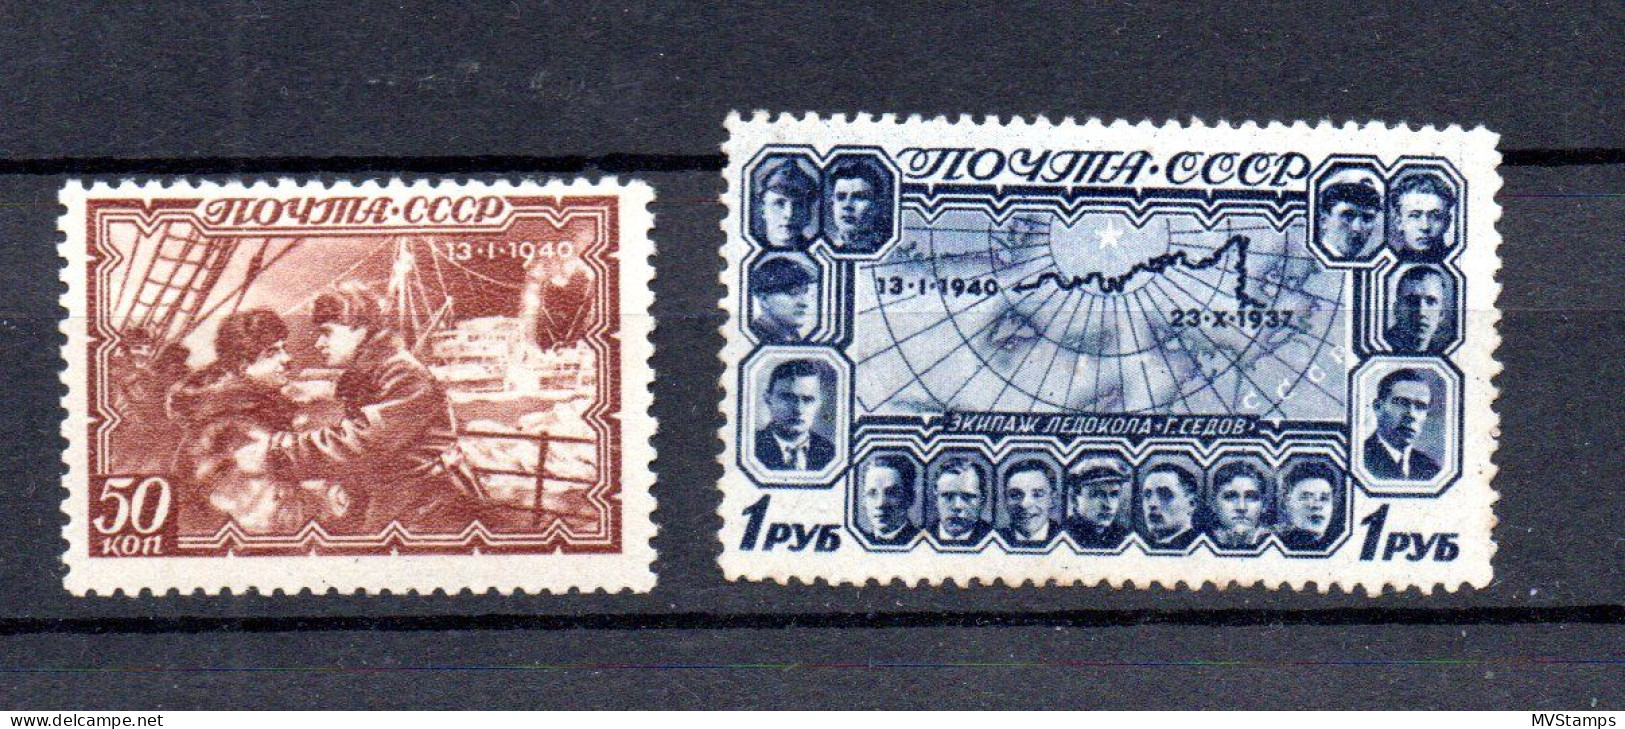 Russia 1940 Old Polar Stamps "G. Sedow" (Michel 743/44) MLH - Neufs